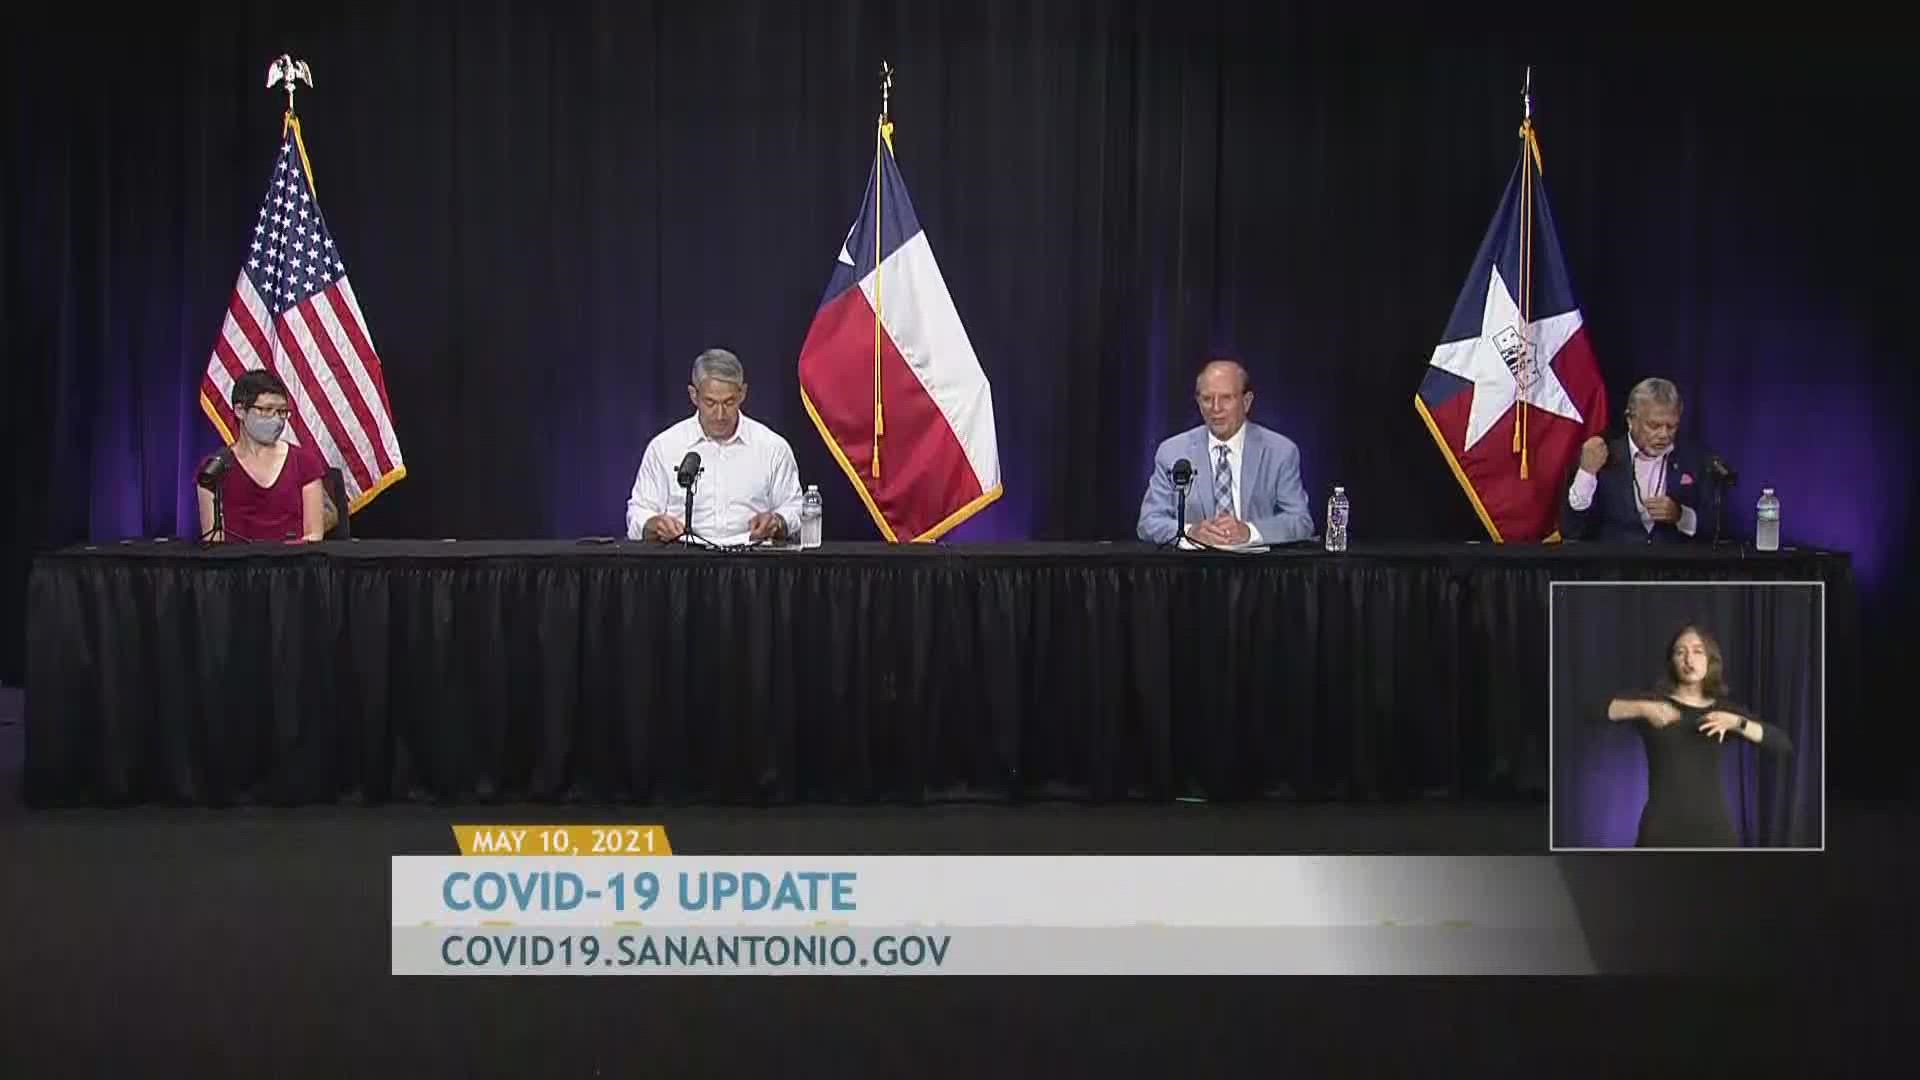 Local leaders say just over 219,000 total cases have been confirmed in Bexar County, while 46% of the county is now fully vaccinated.